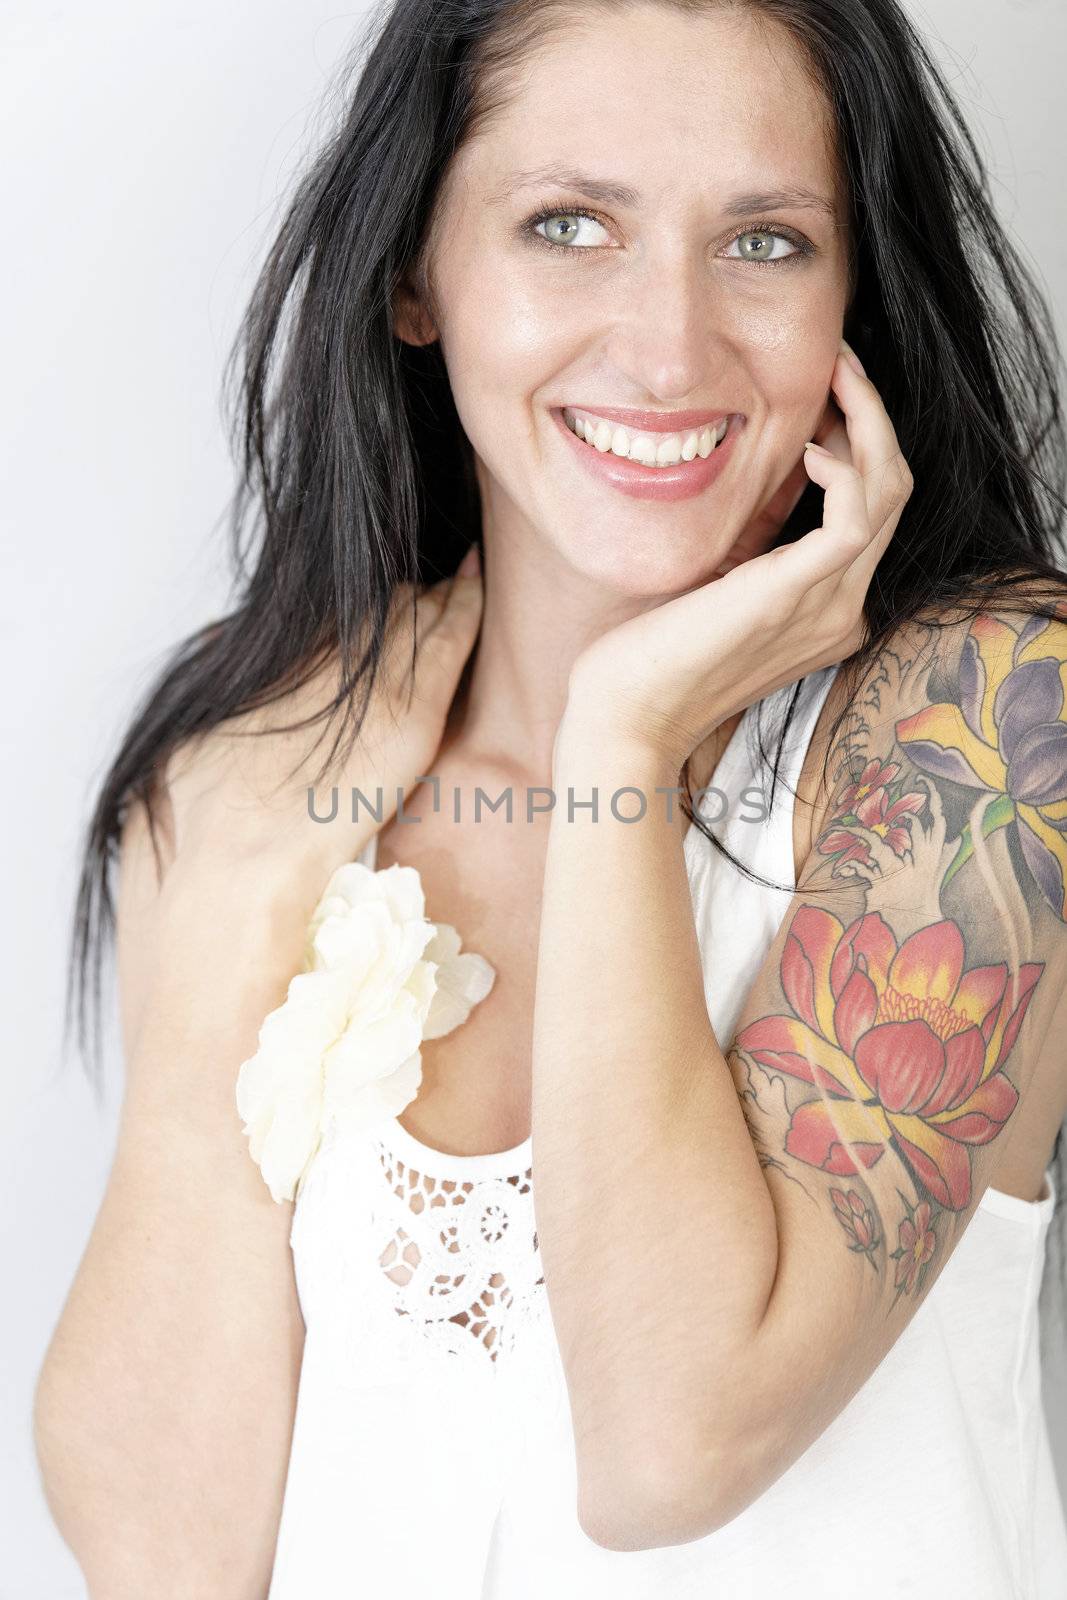 Portrait of a beautiful young woman with a tattoo